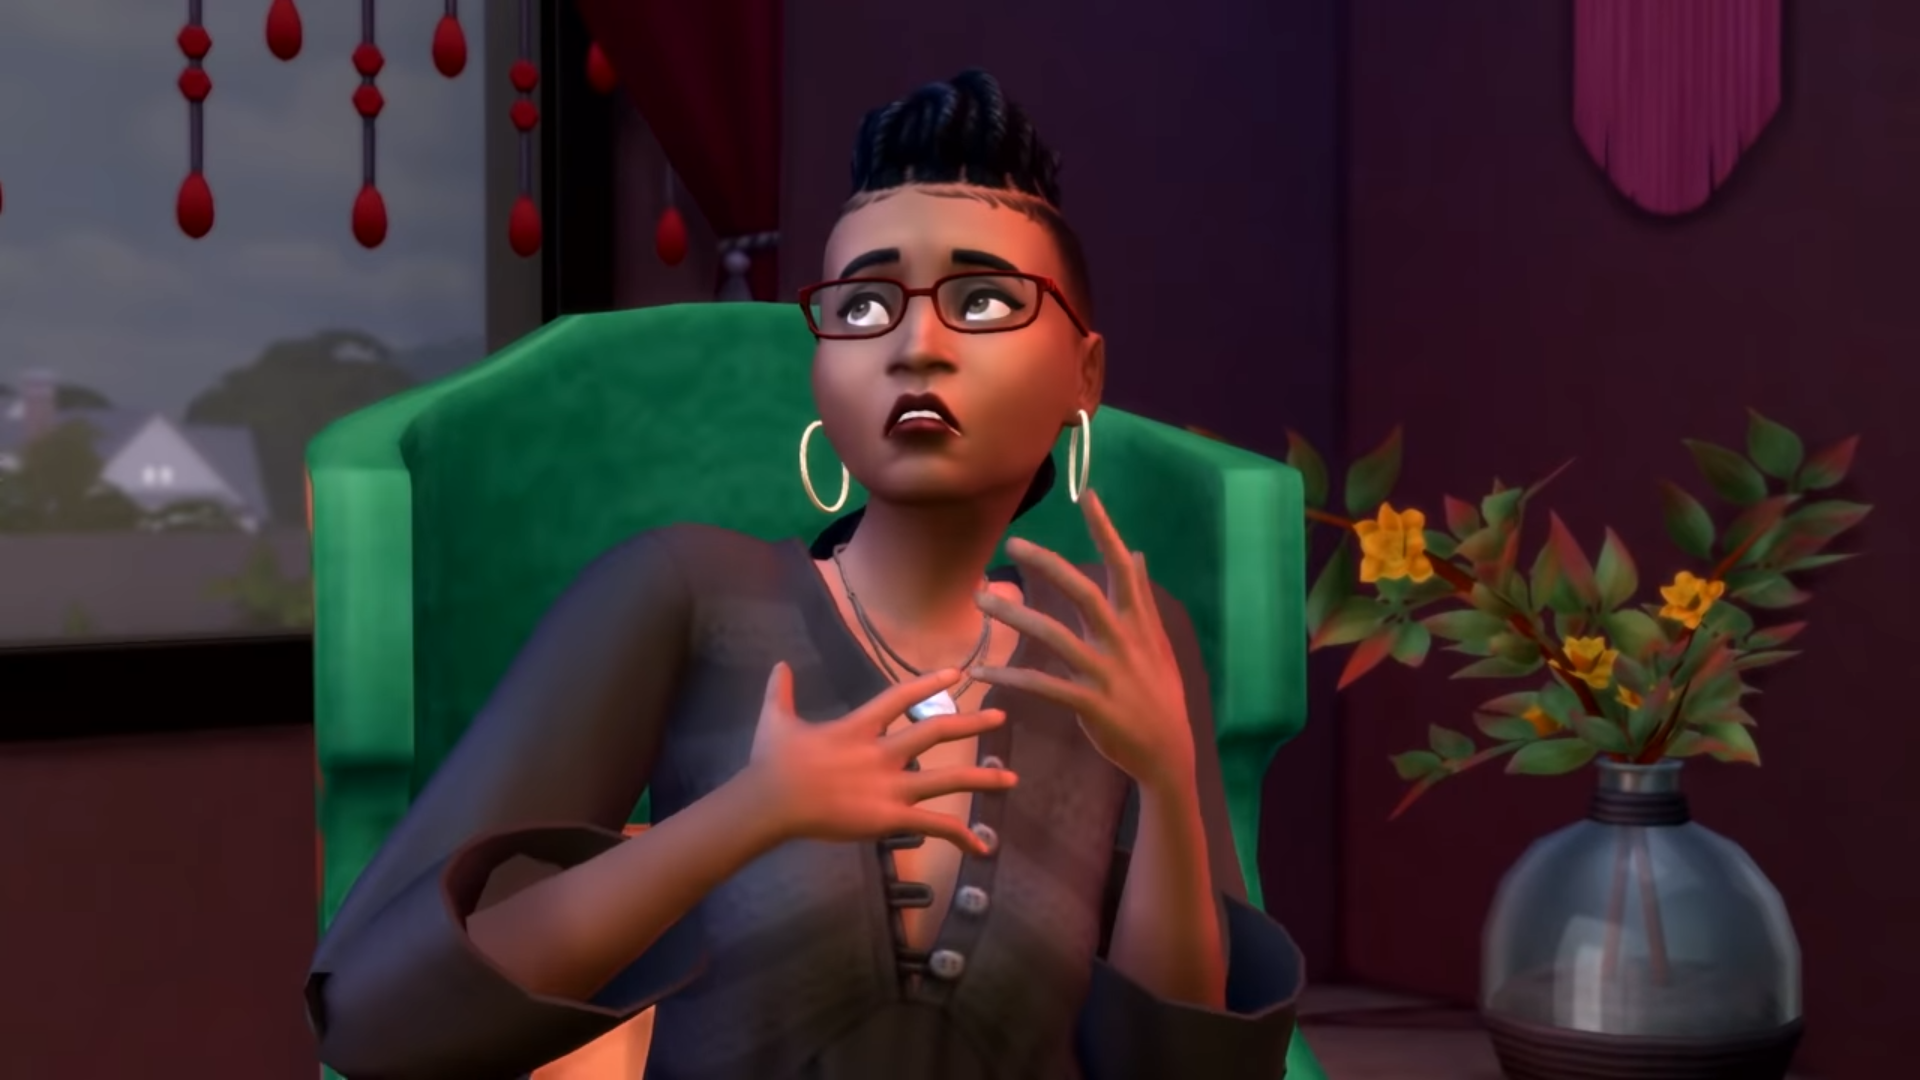 are there new hairstyles in the sims 4 spooky stuff